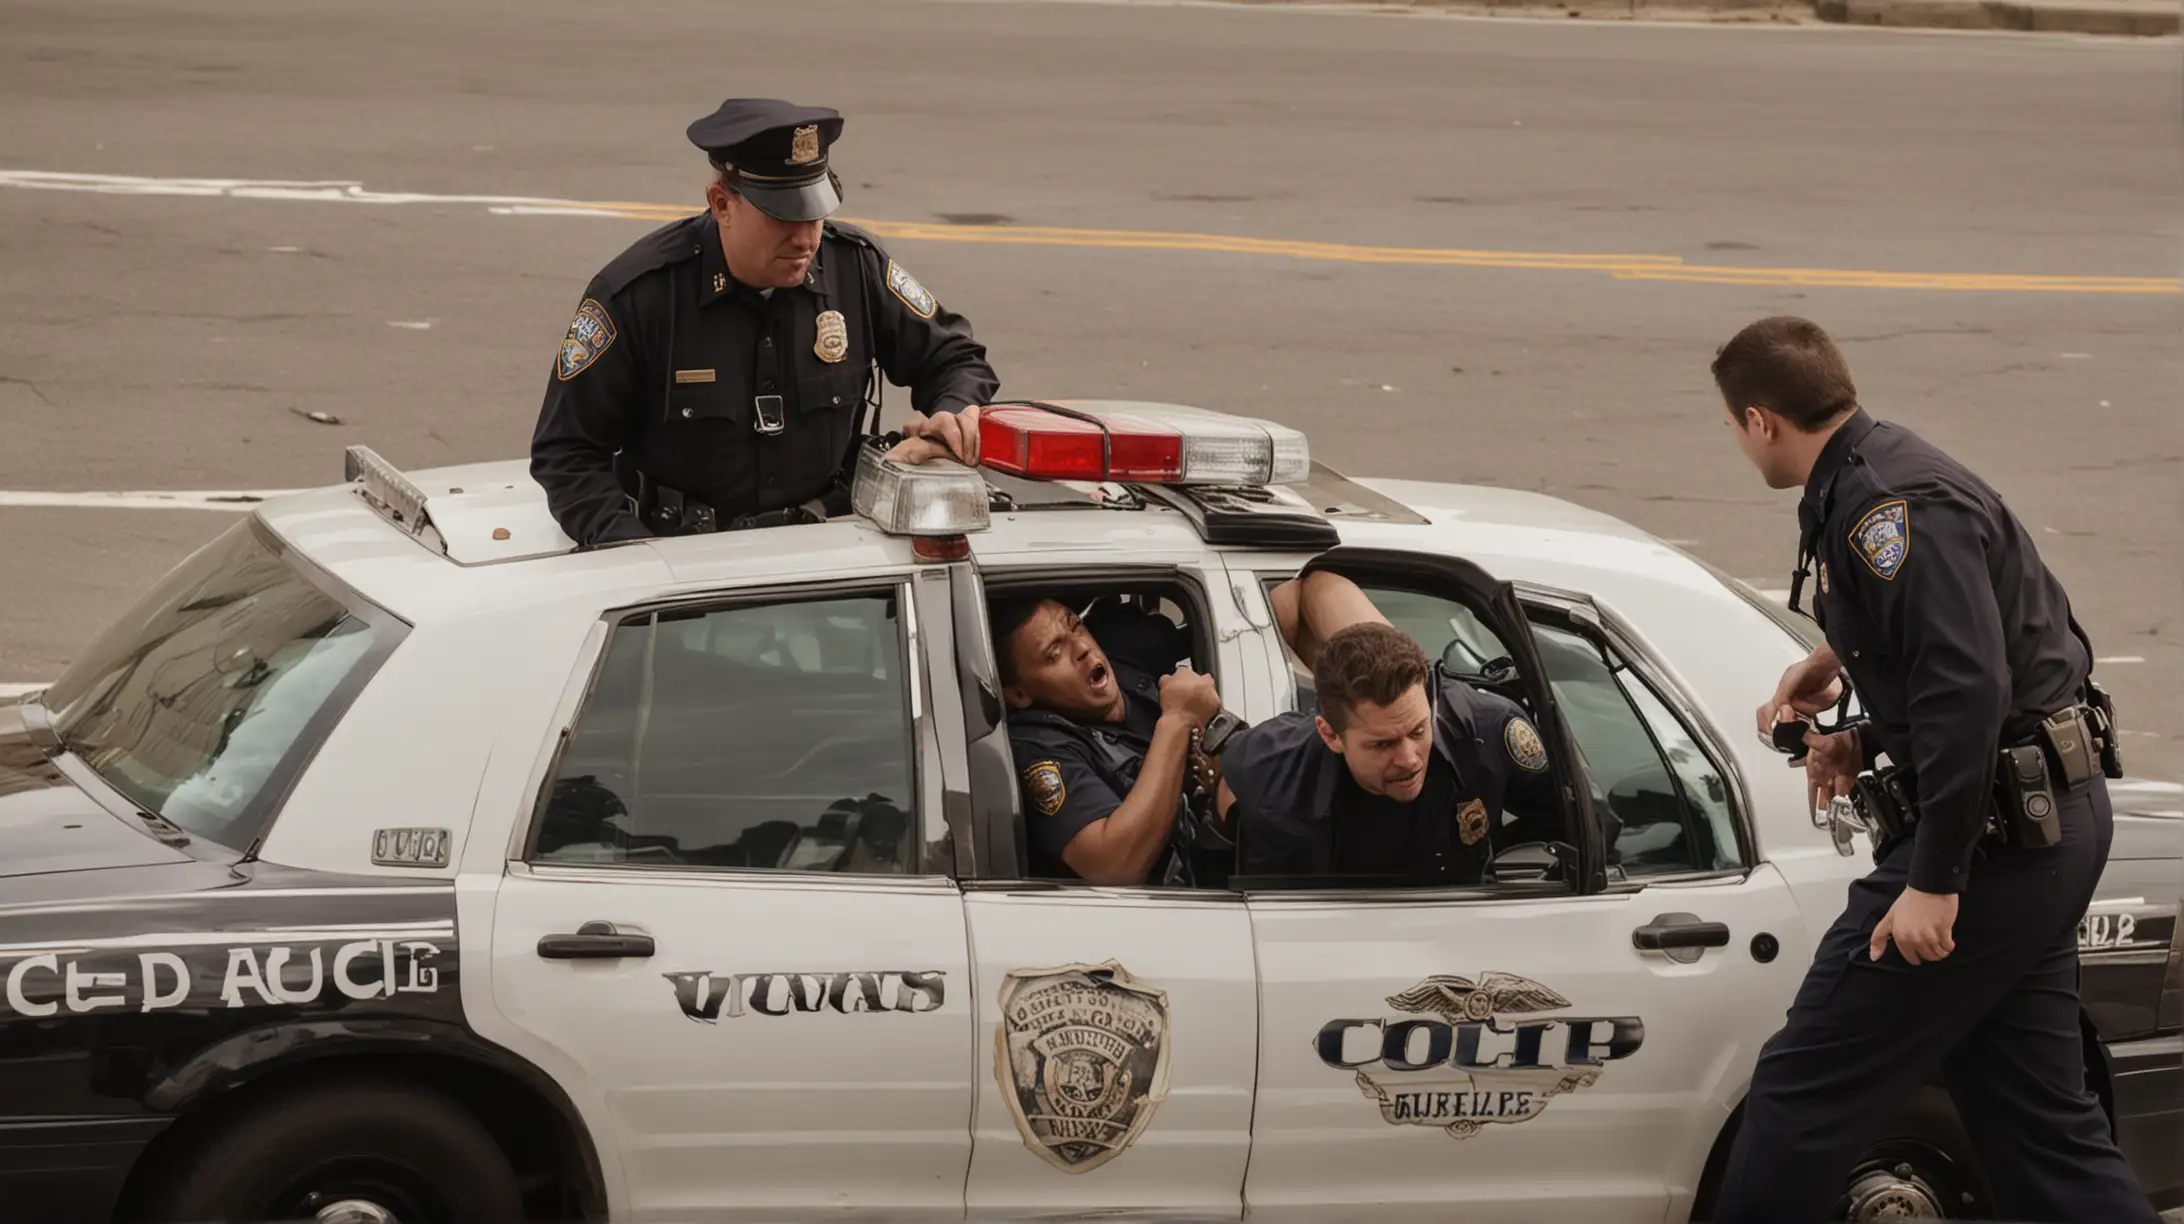 man being arrested up against a cop car